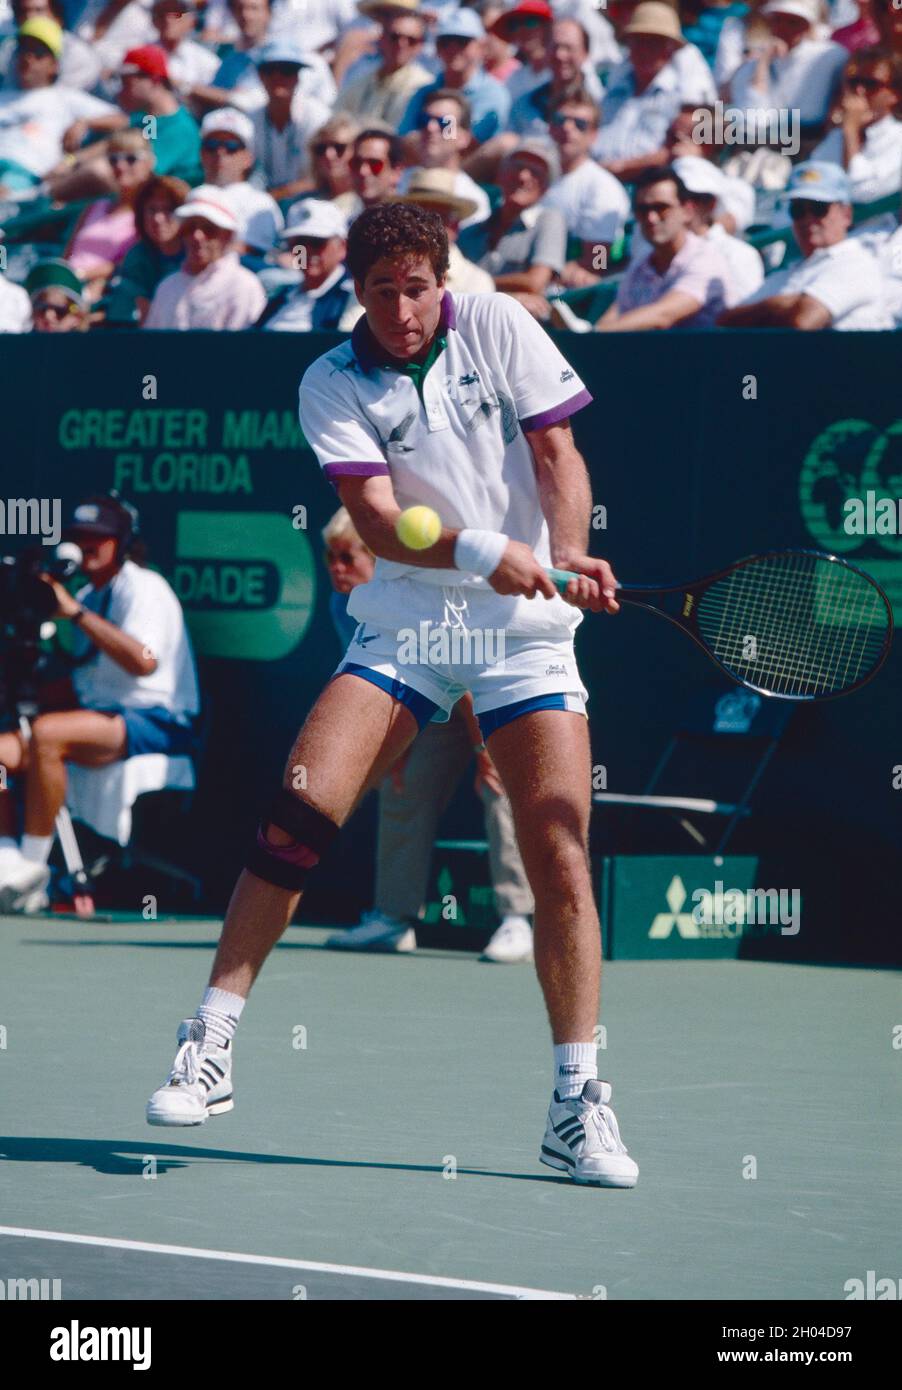 American tennis player Jay Berger, 1990s Stock Photo